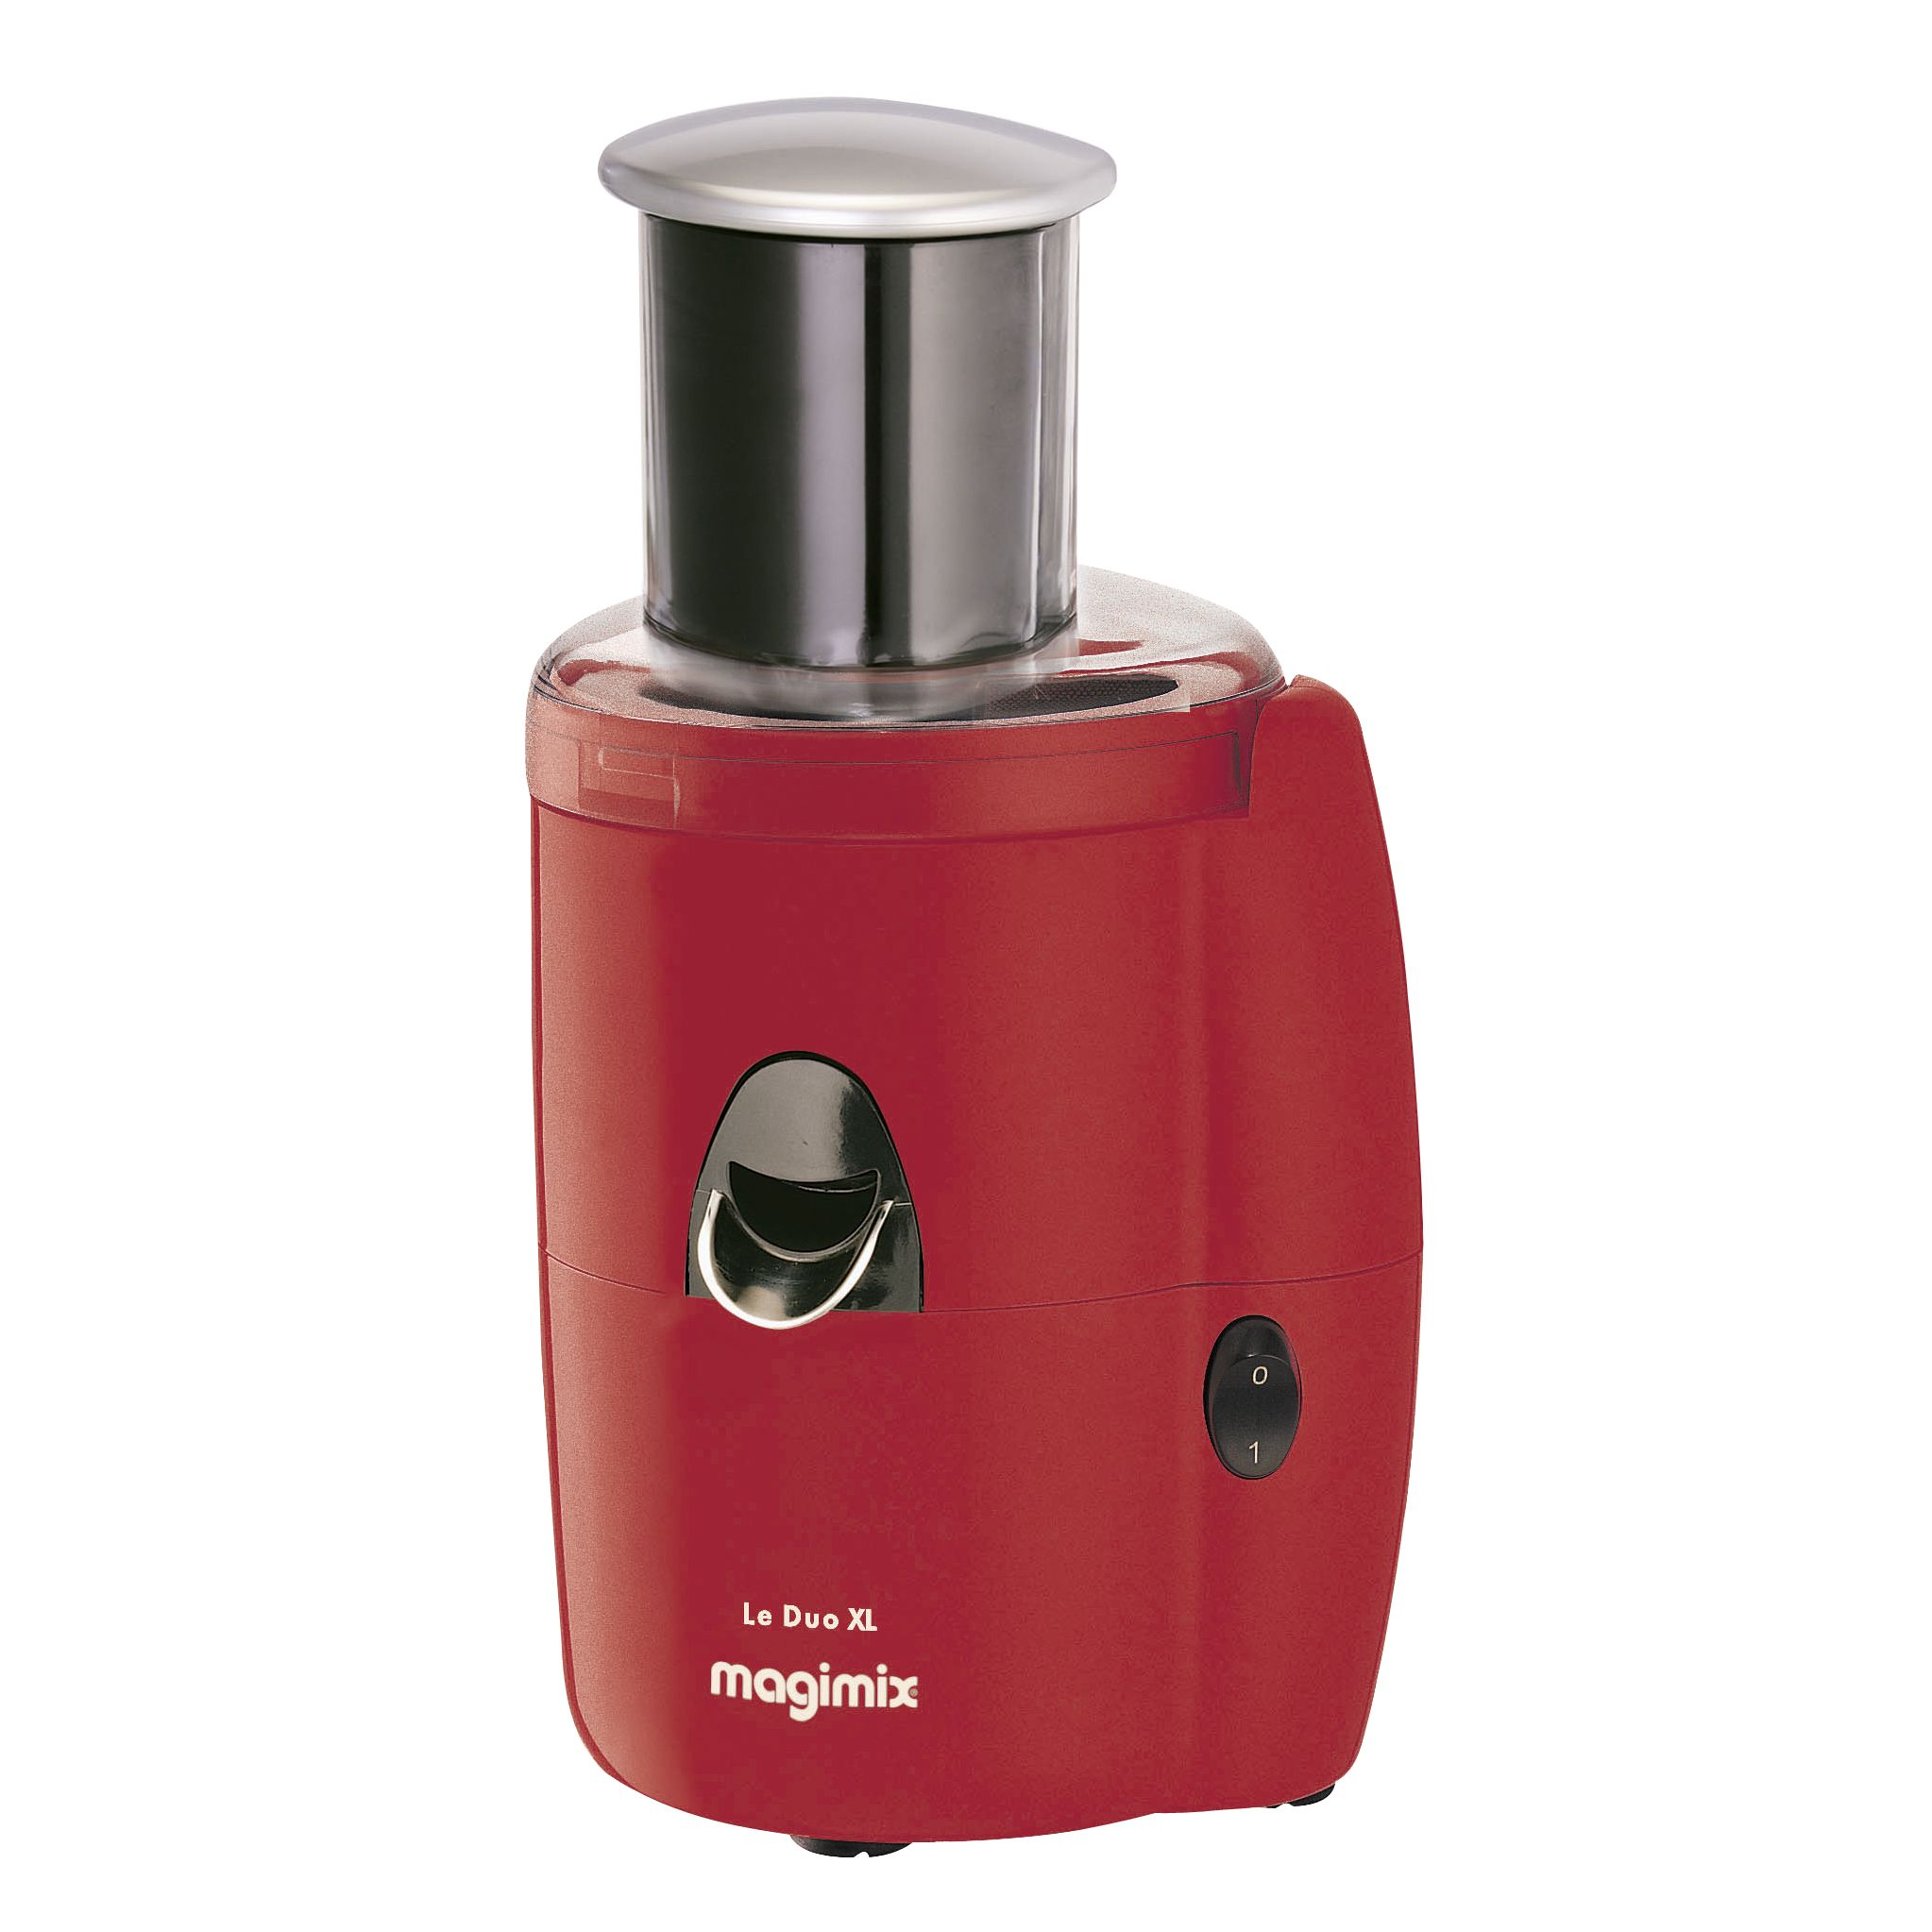 Magimix Le Duo XL Juice Extractor, Red at John Lewis